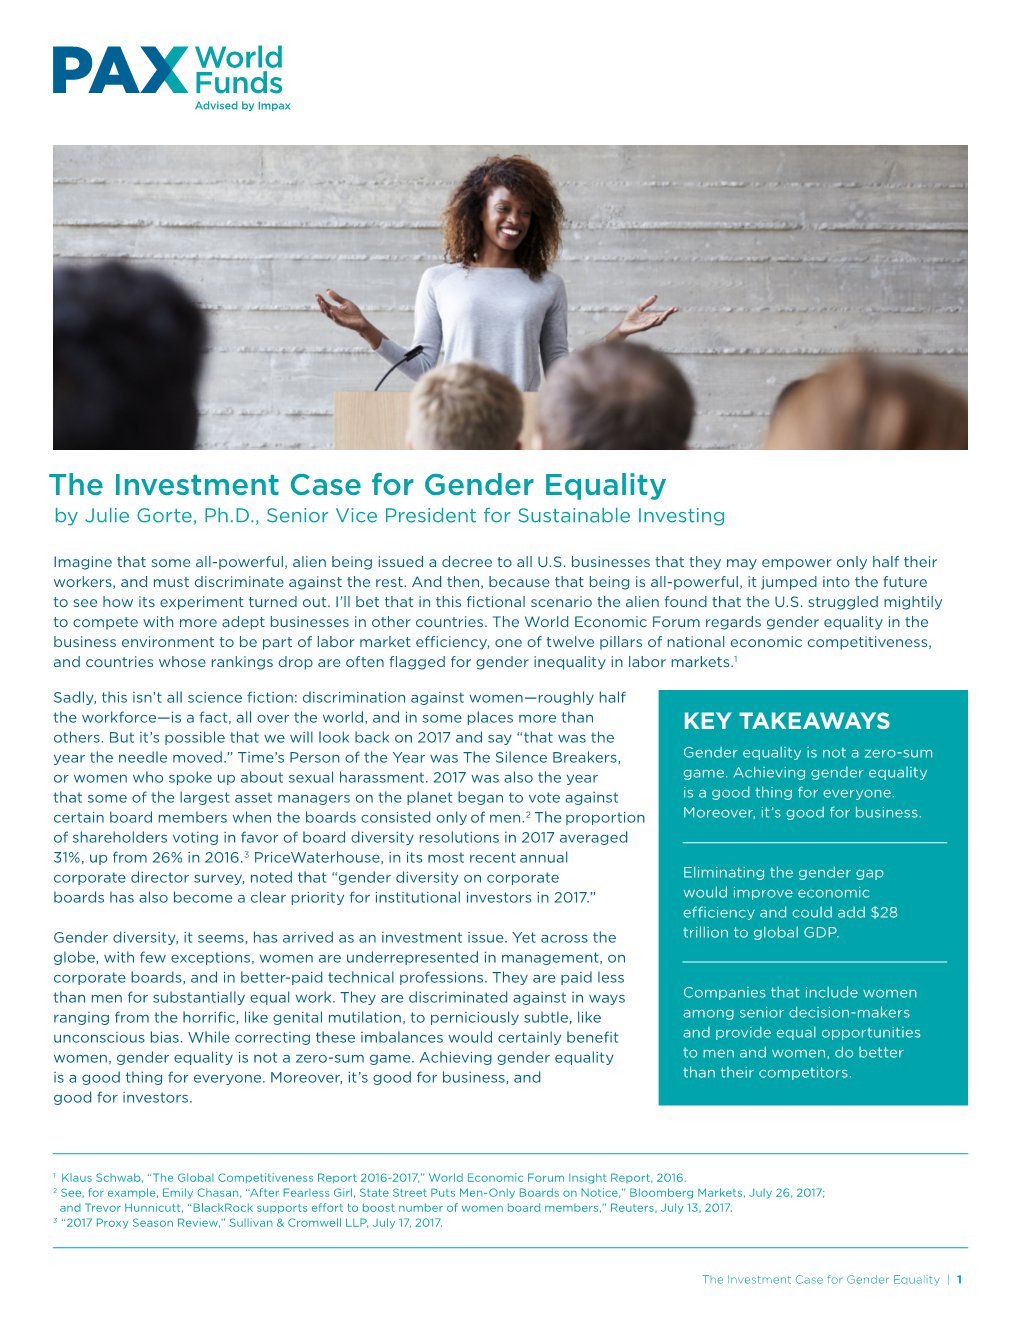 The Investment Case for Gender Equality by Julie Gorte, Ph.D., Senior Vice President for Sustainable Investing